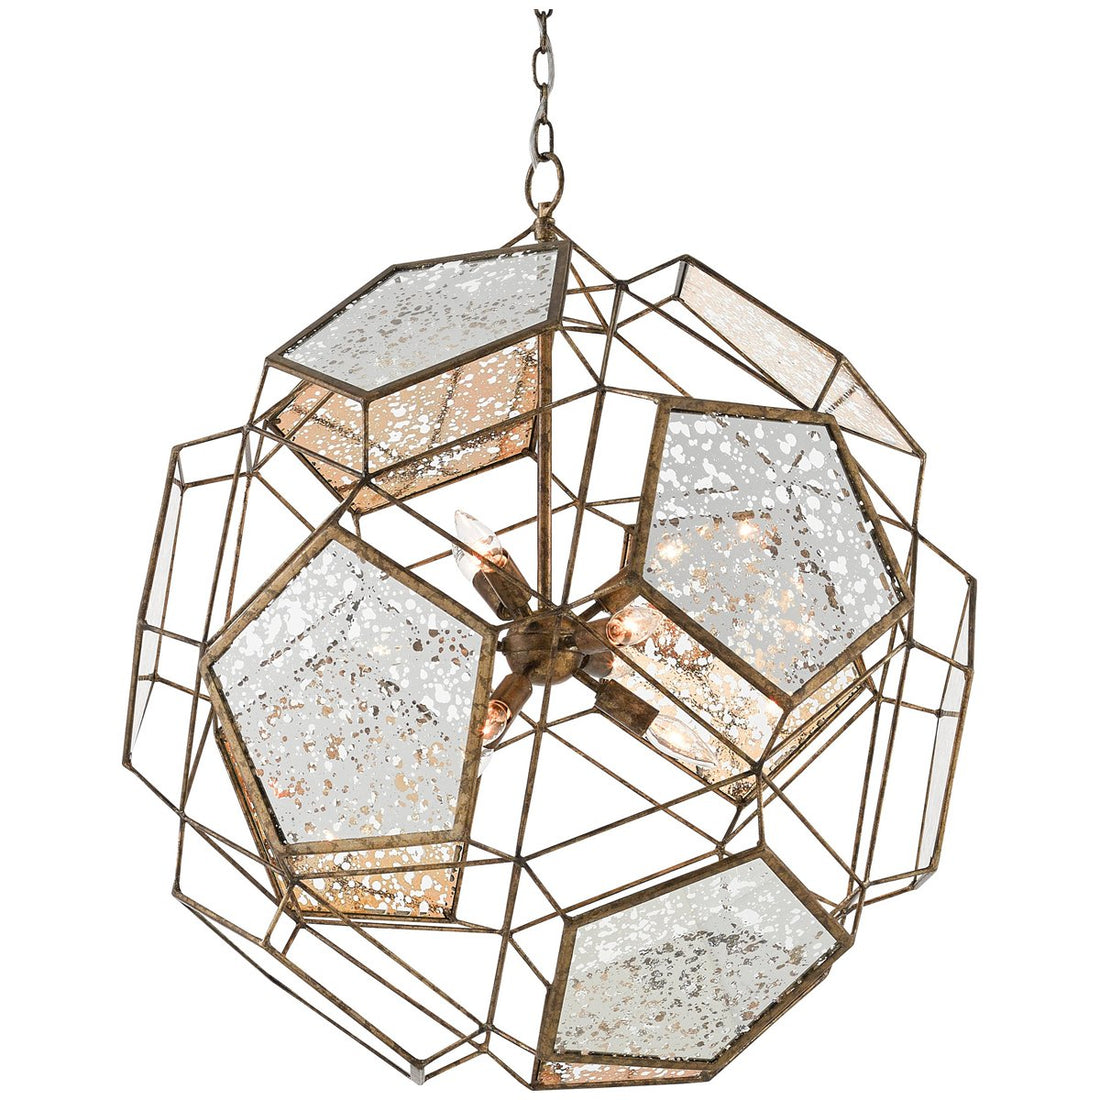 Currey and Company Julius Orb Chandelier